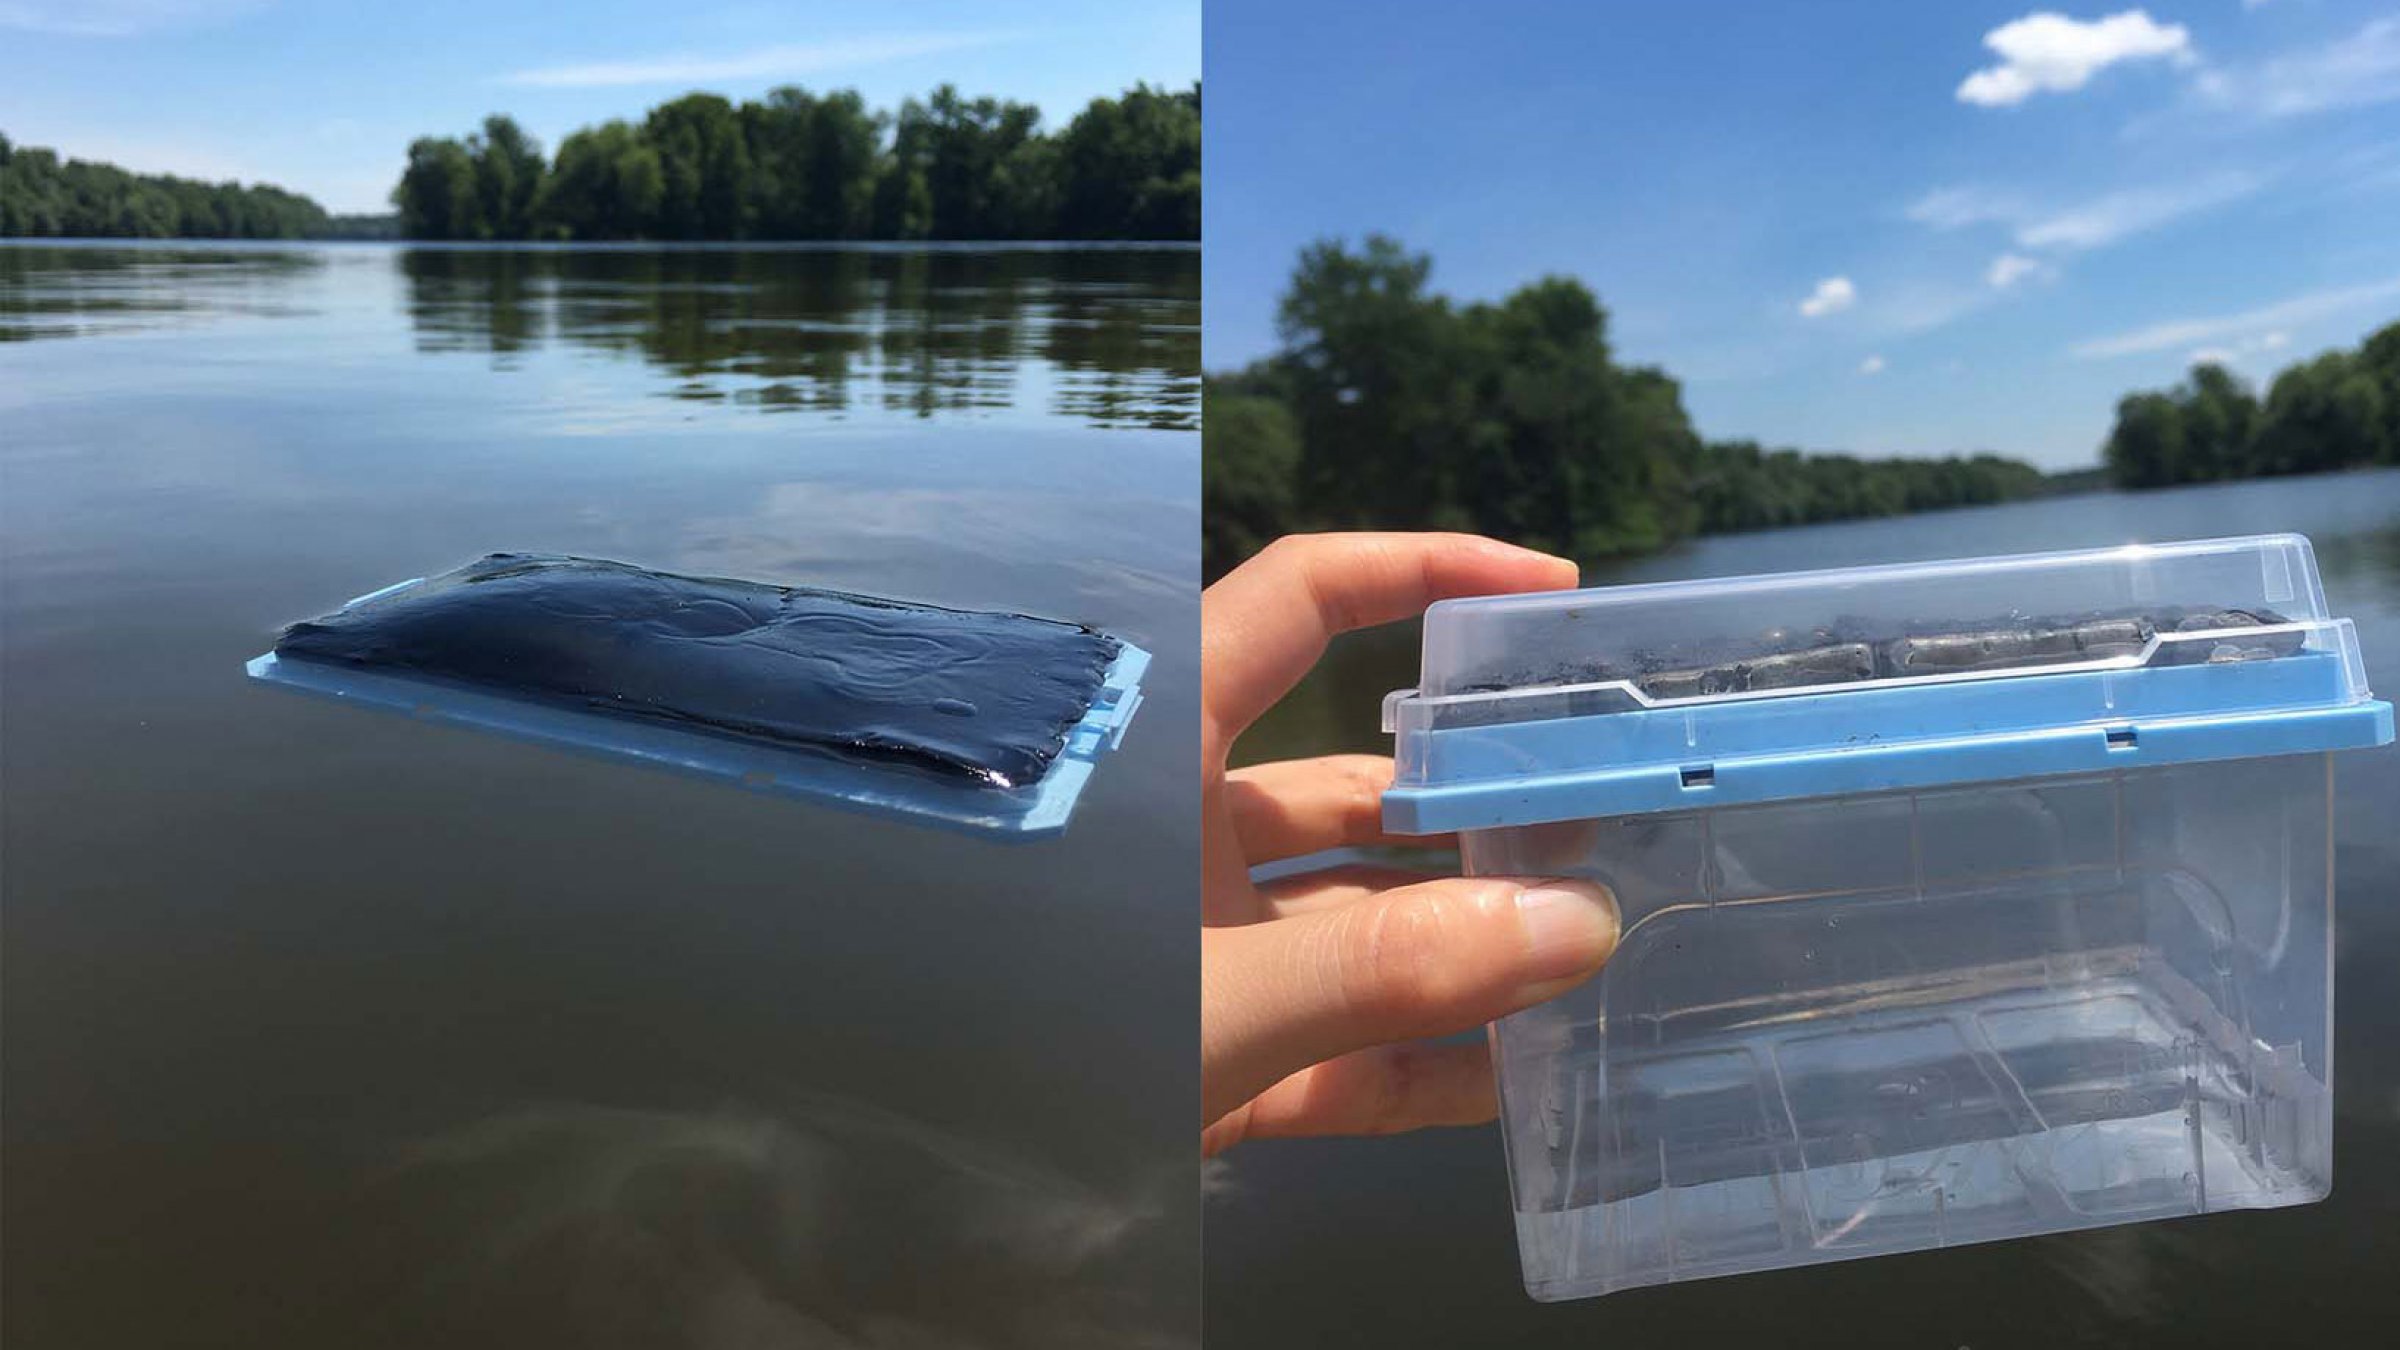 In a study conducted at Princeton University, researchers placed the gel in lake water where it absorbed pure water, leaving contaminants behind. The researchers then placed the gel in the sun, where solar energy heated up the gel, causing the discharge of the pure water into the container. (Photos by Xiaohui Xu)